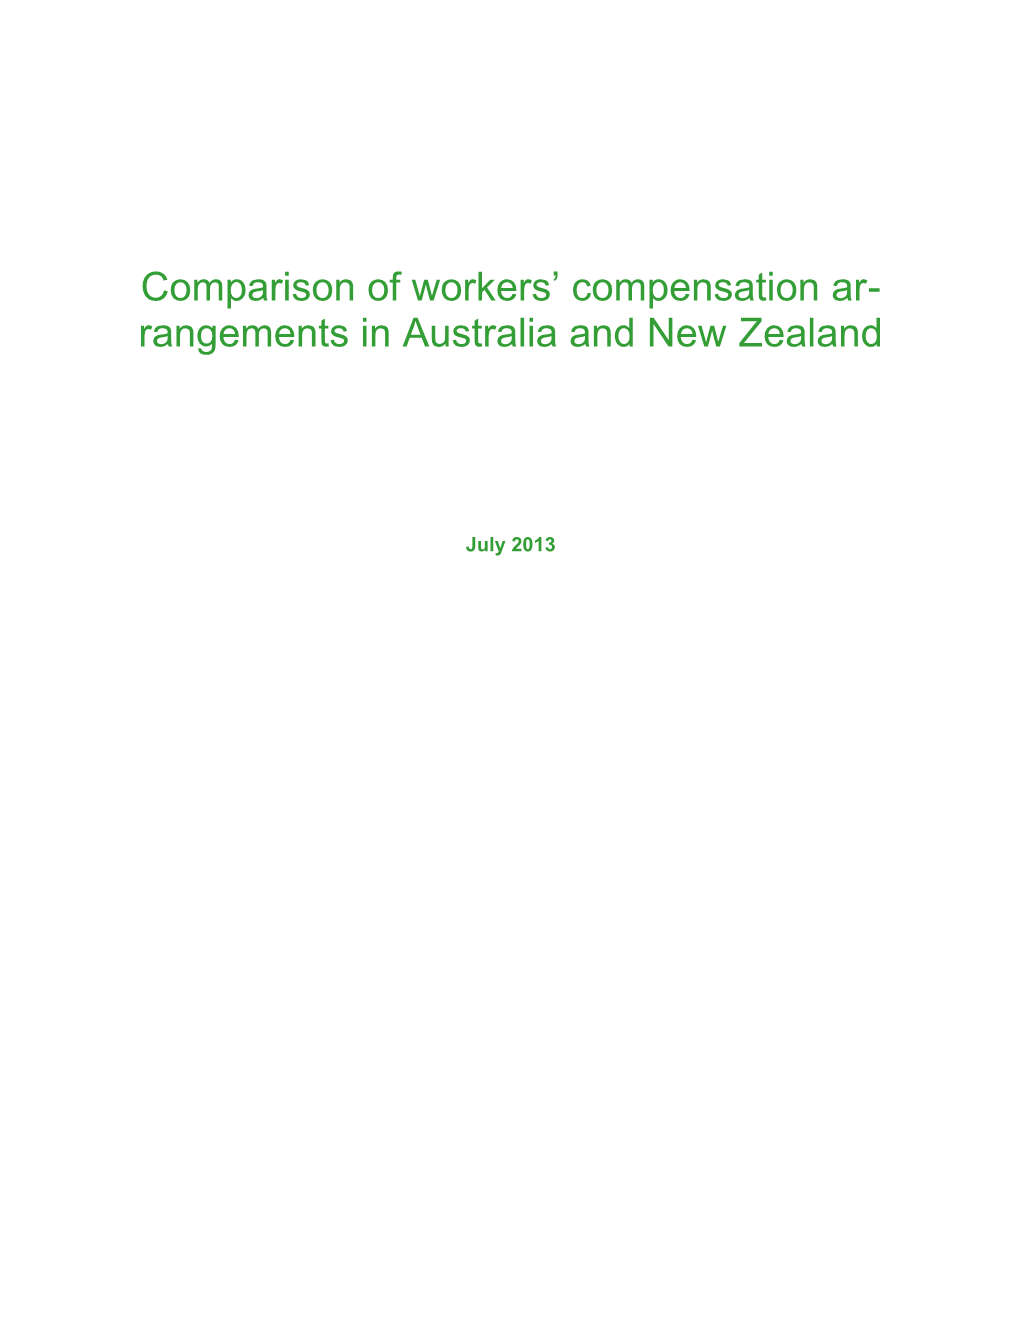 Comparison of Workers Compensation Arrangements in Australia and New Zealand (2013)